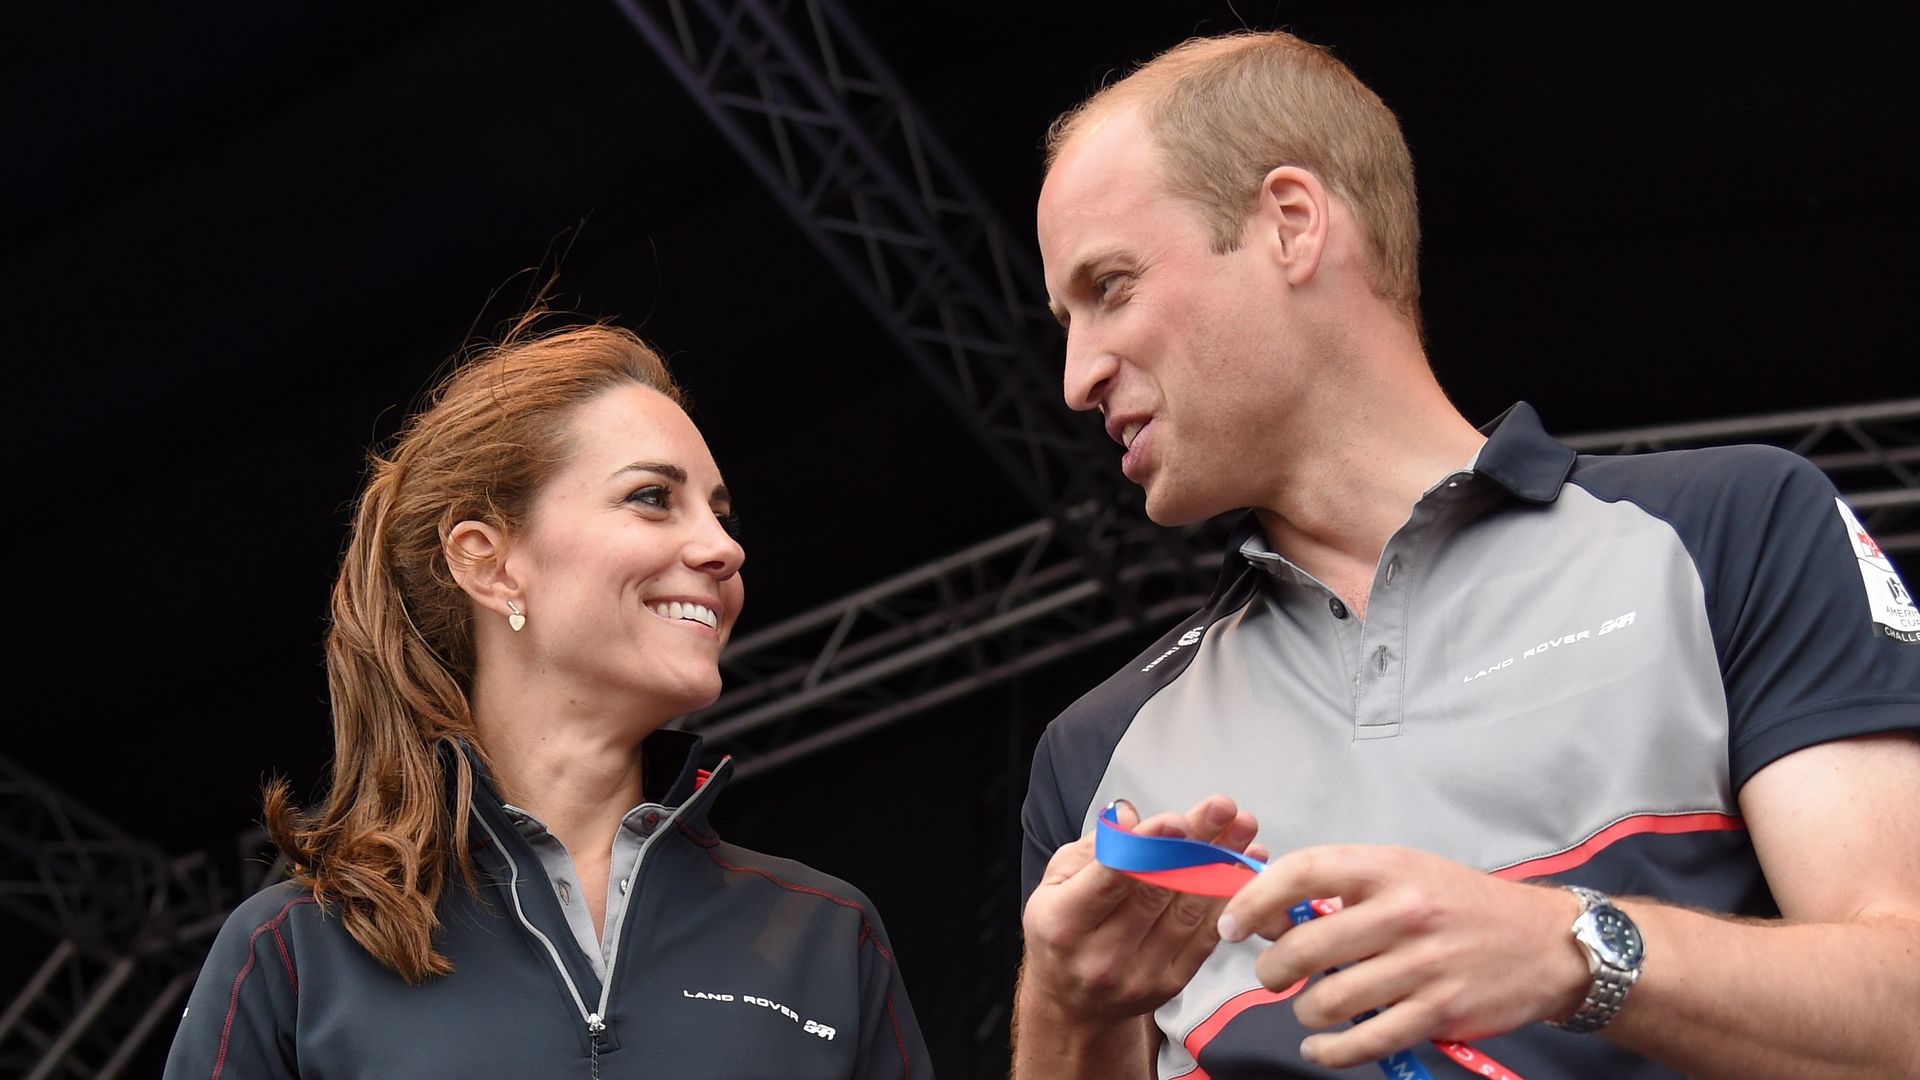 Prince William and Princess Kate smiling at eachother